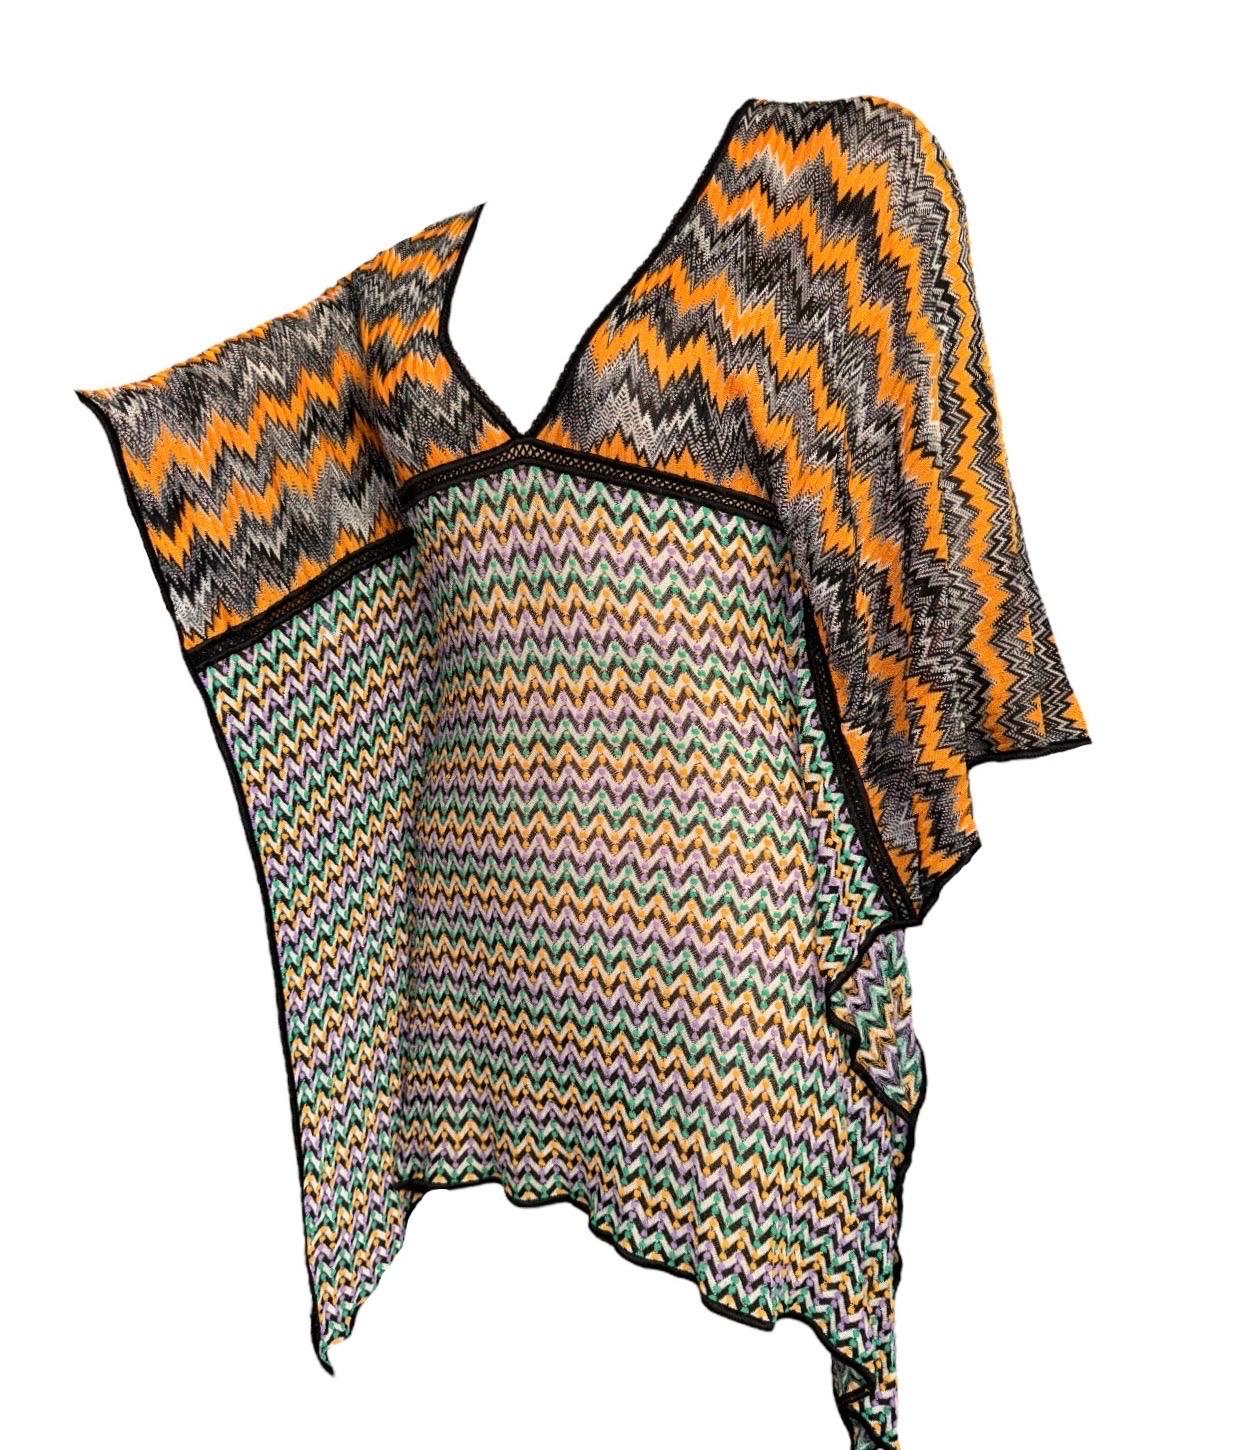 Missoni crochet-knit kaftan is cut for a stunning fit that's perfect for hot days by the pool. Offset the instantly recognizable zigzag pattern with a block-color swimsuit in a tonal shade
A signature Missoni knit caftan in a cascade of colors is